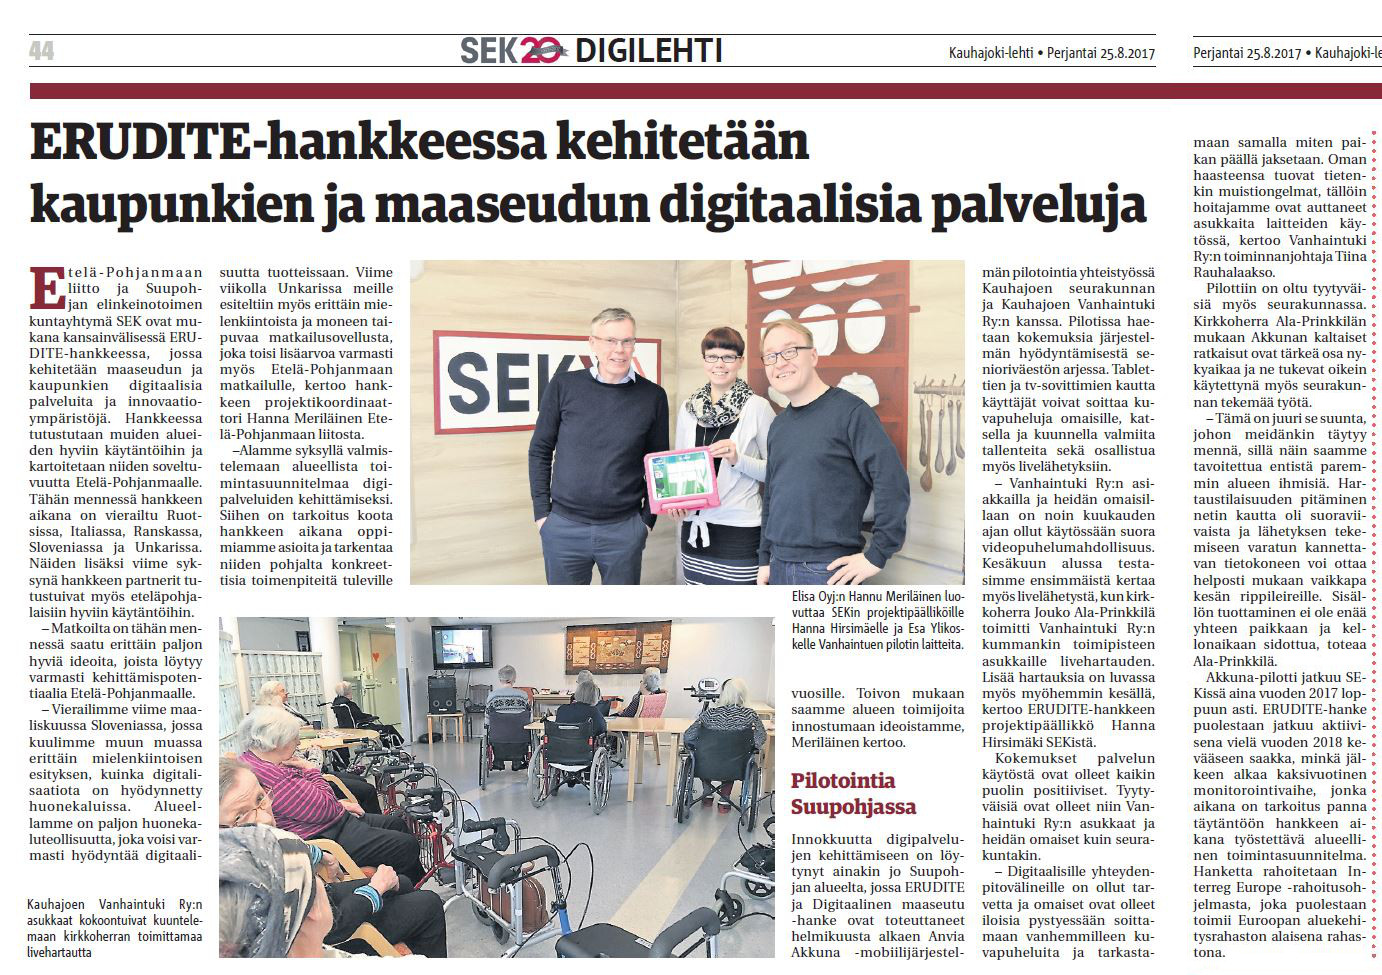 Digitalisation in Finnish towns and rural areas